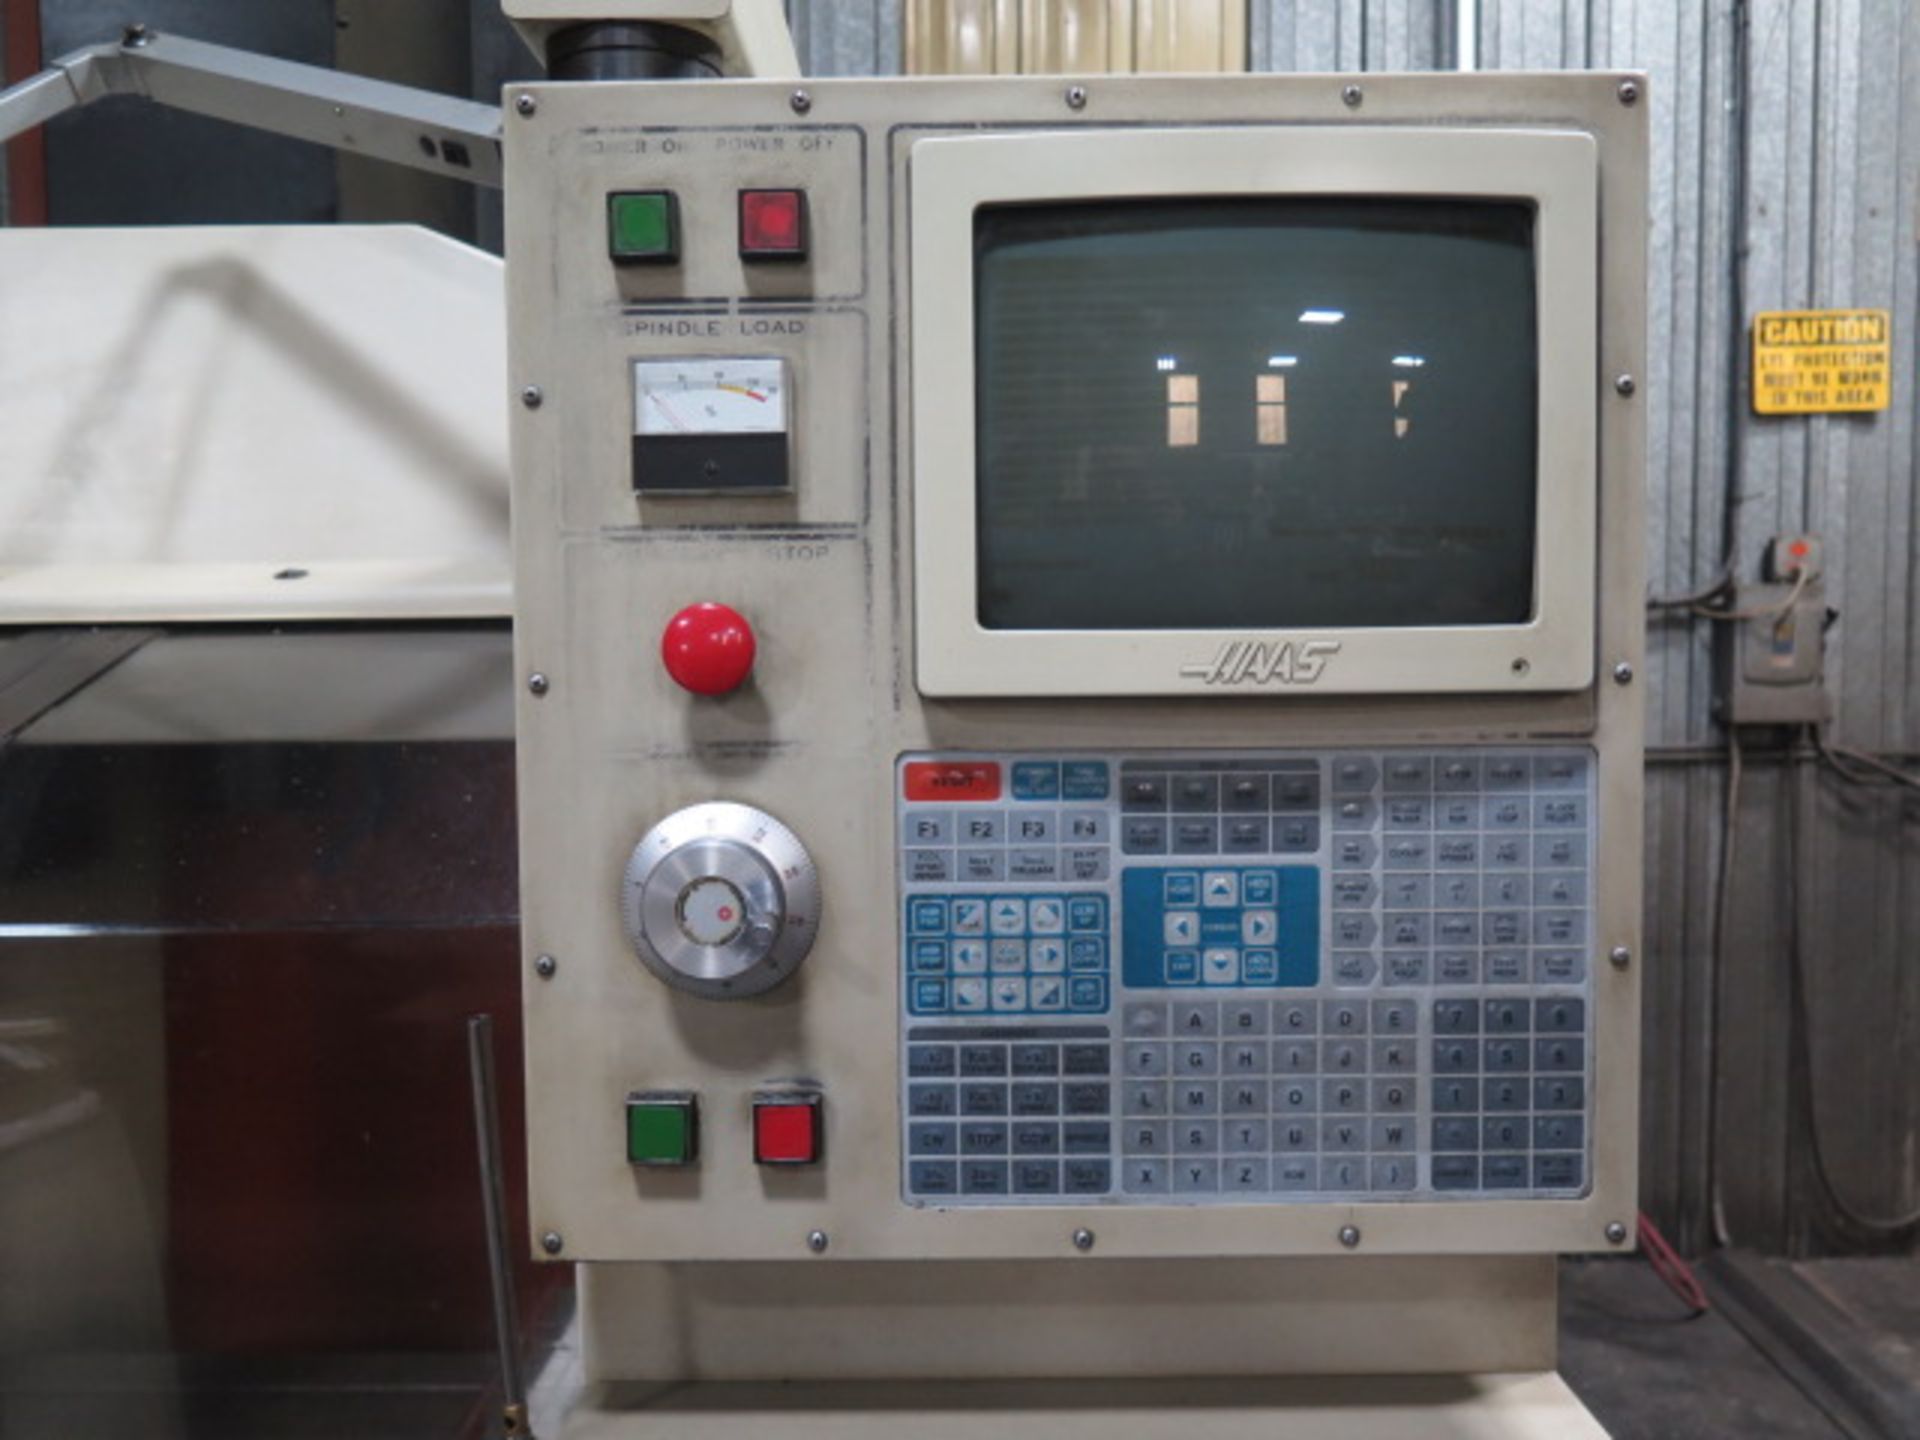 1992 Haas VF-0 4-Axis CNC Vertical Machining Center s/n Haas Controls, 20-Station ATC, CAT-40 - Image 11 of 14